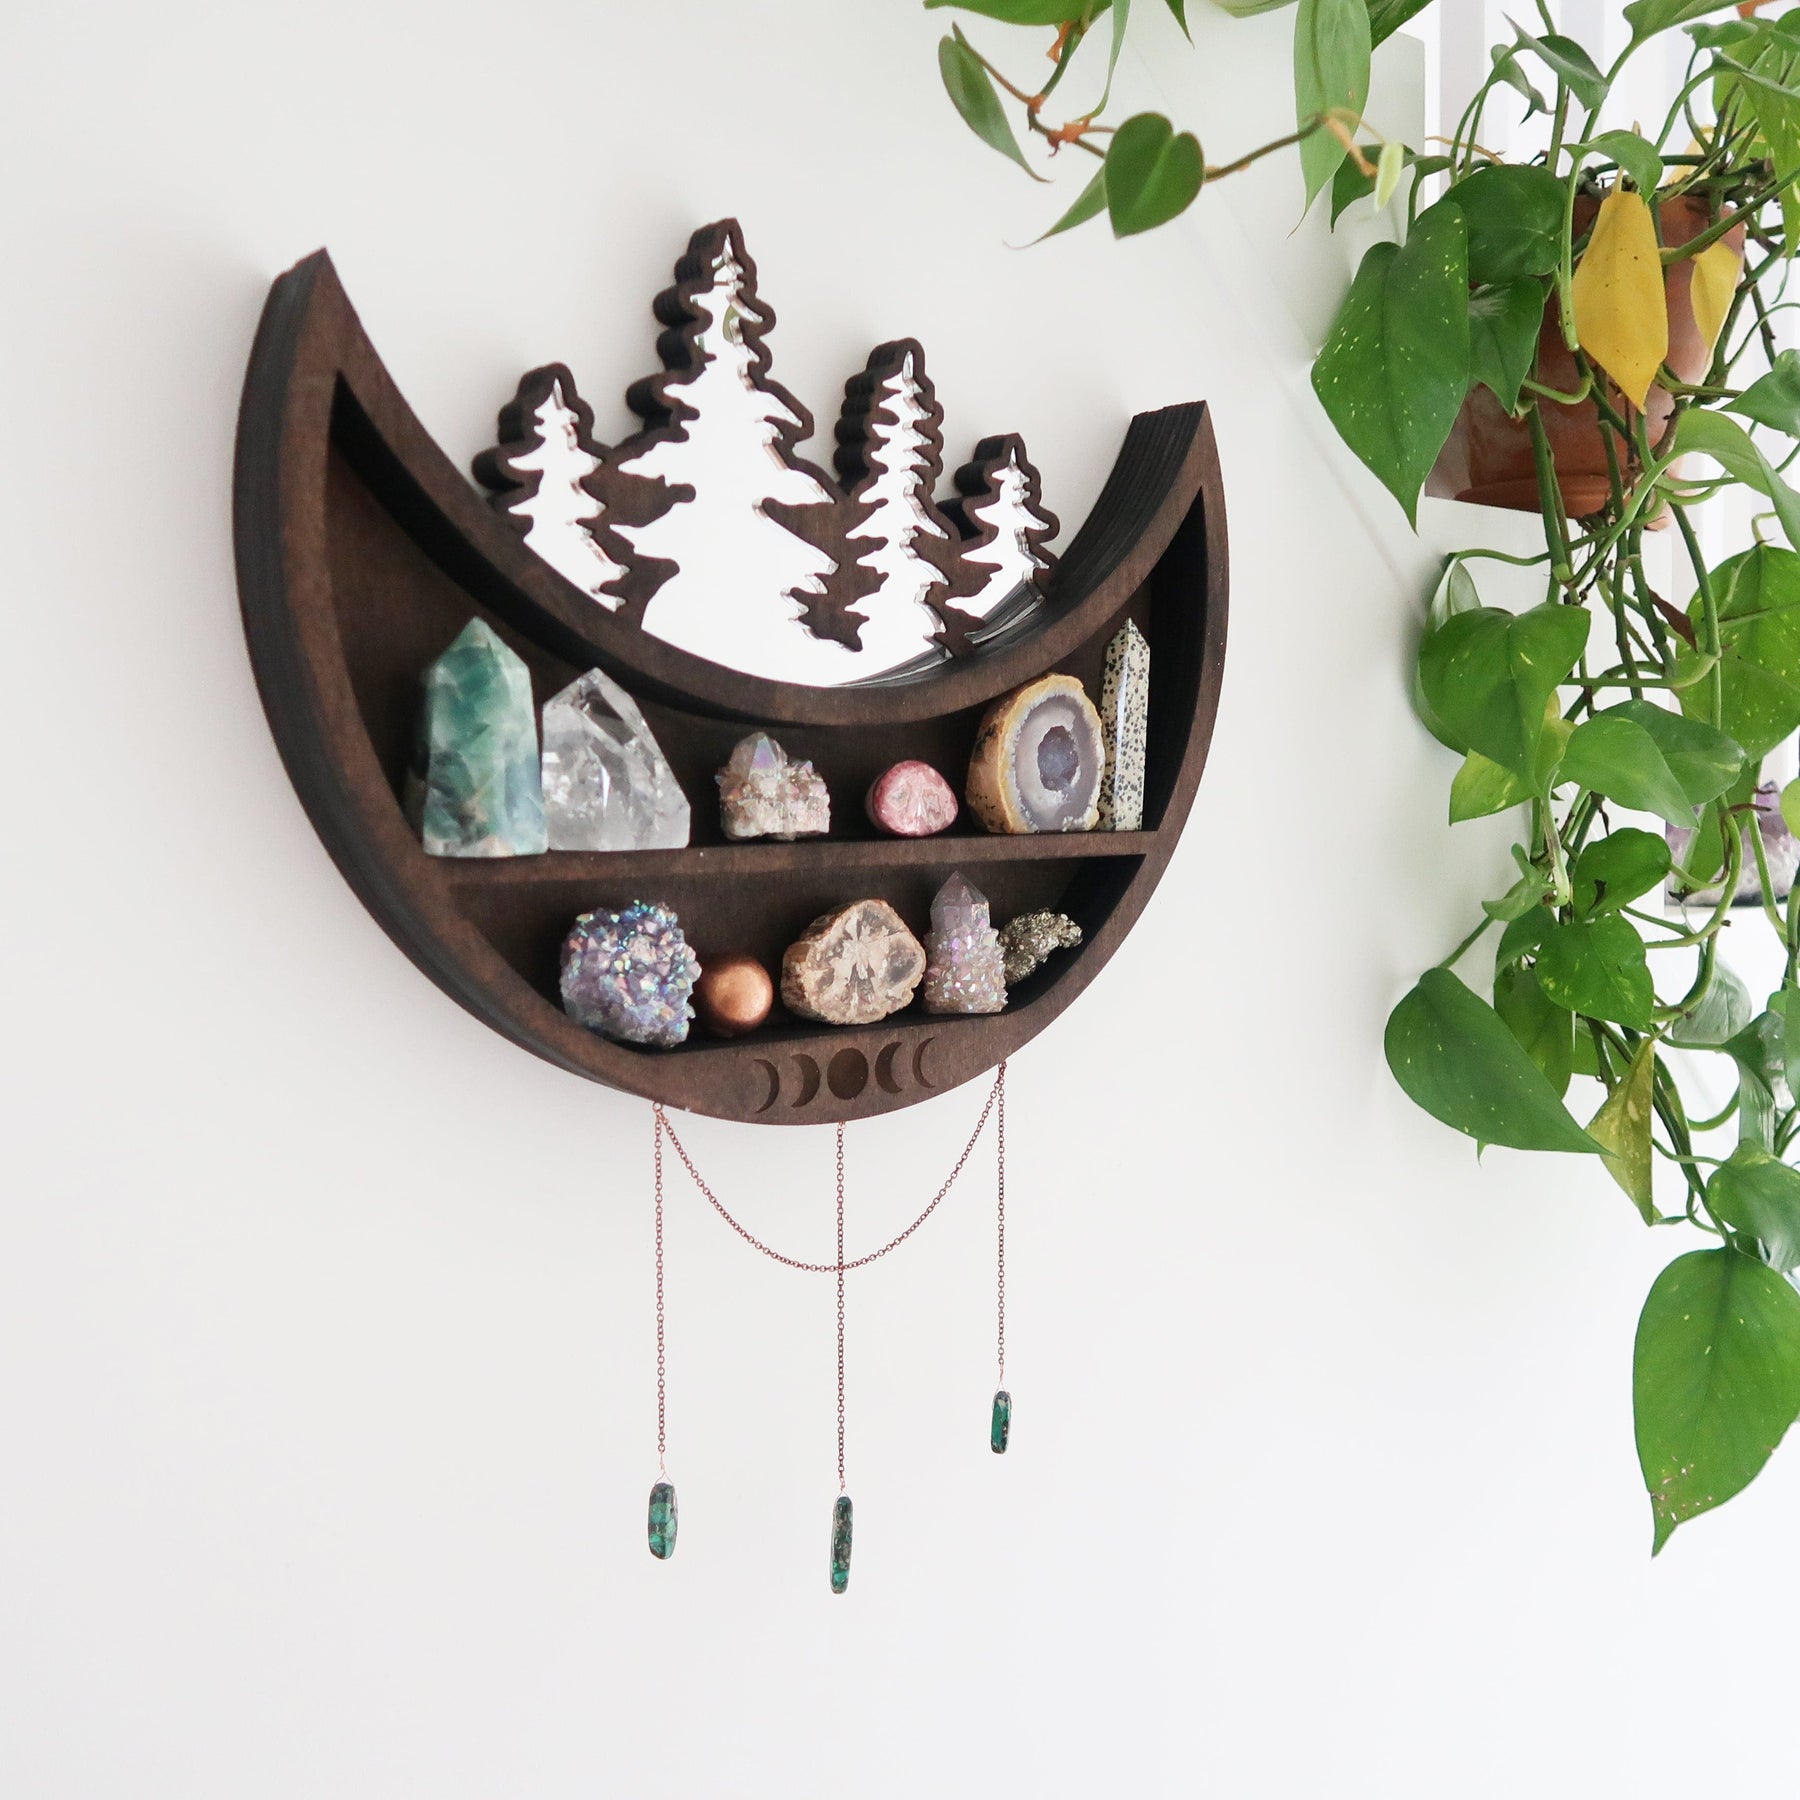 Moon and Forest Cluster Moonphase Mirror Shelf – Coppermoon